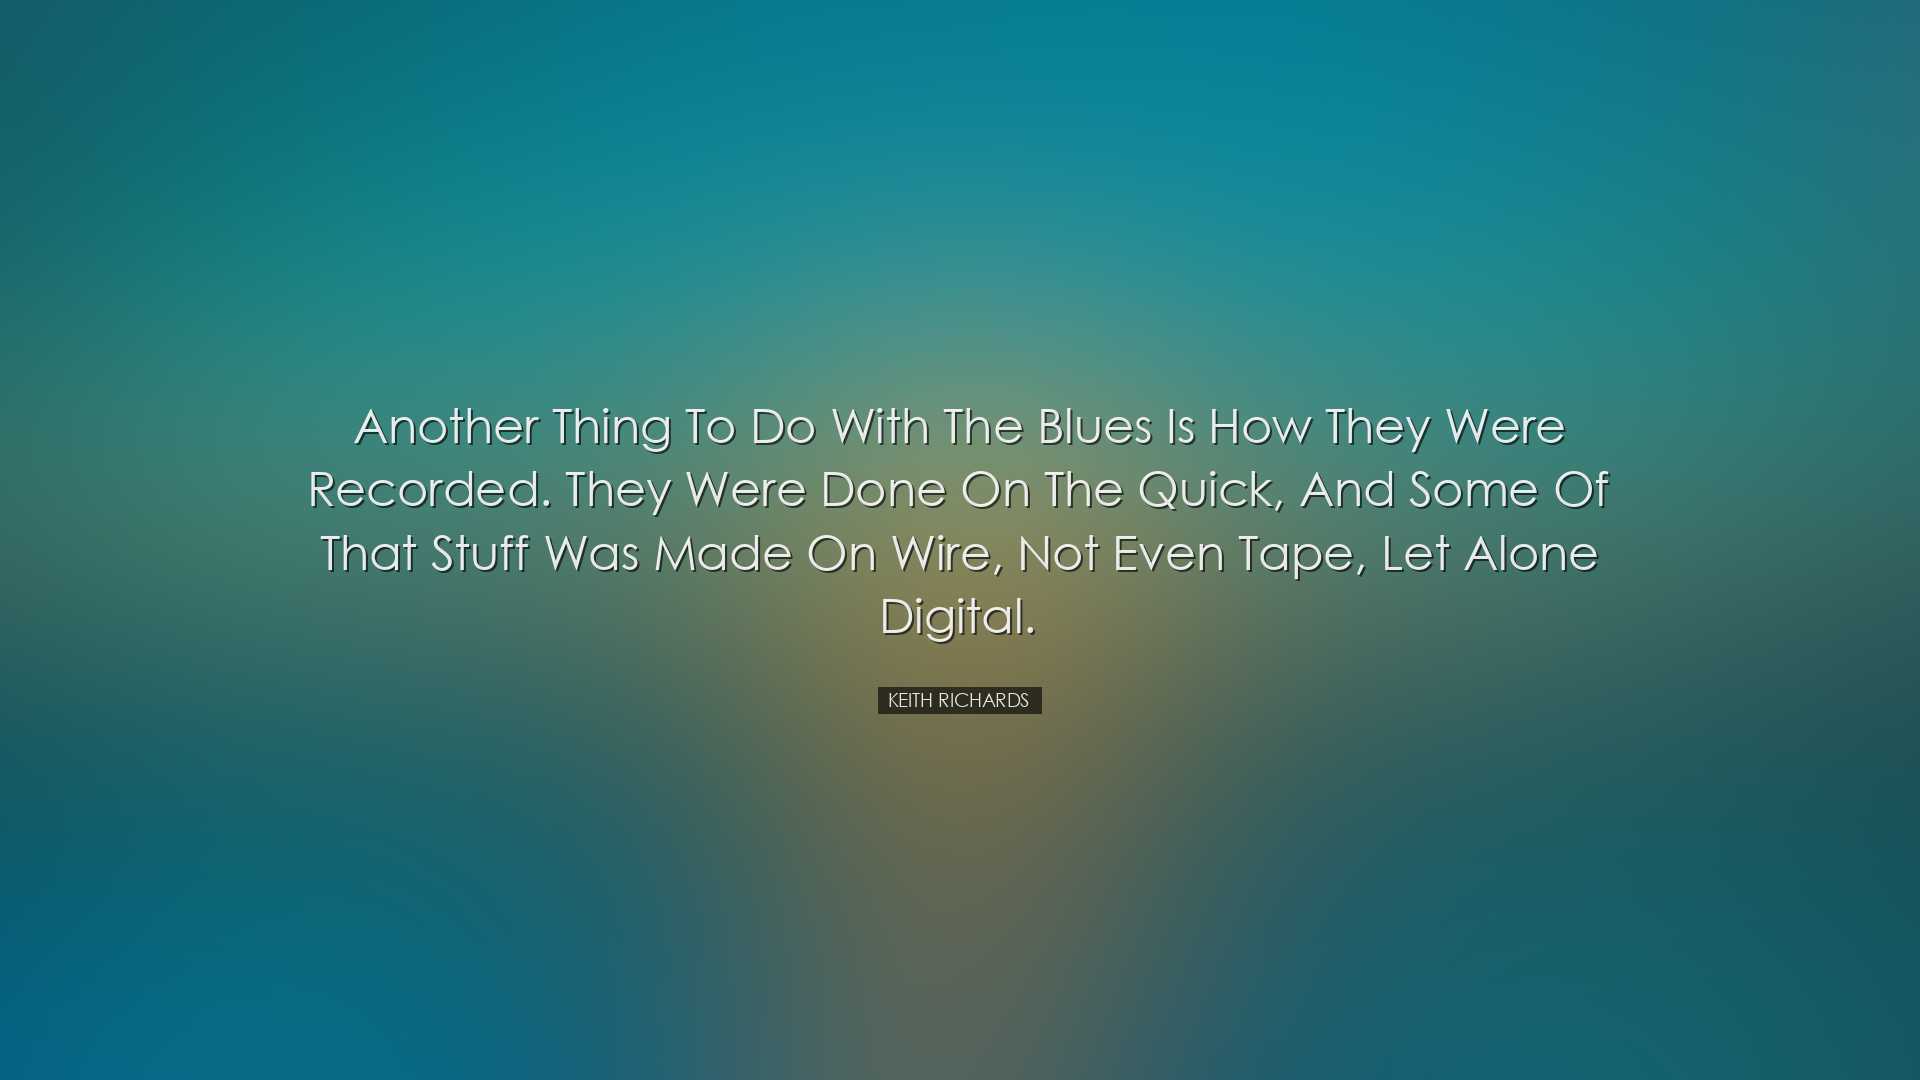 Another thing to do with the blues is how they were recorded. They